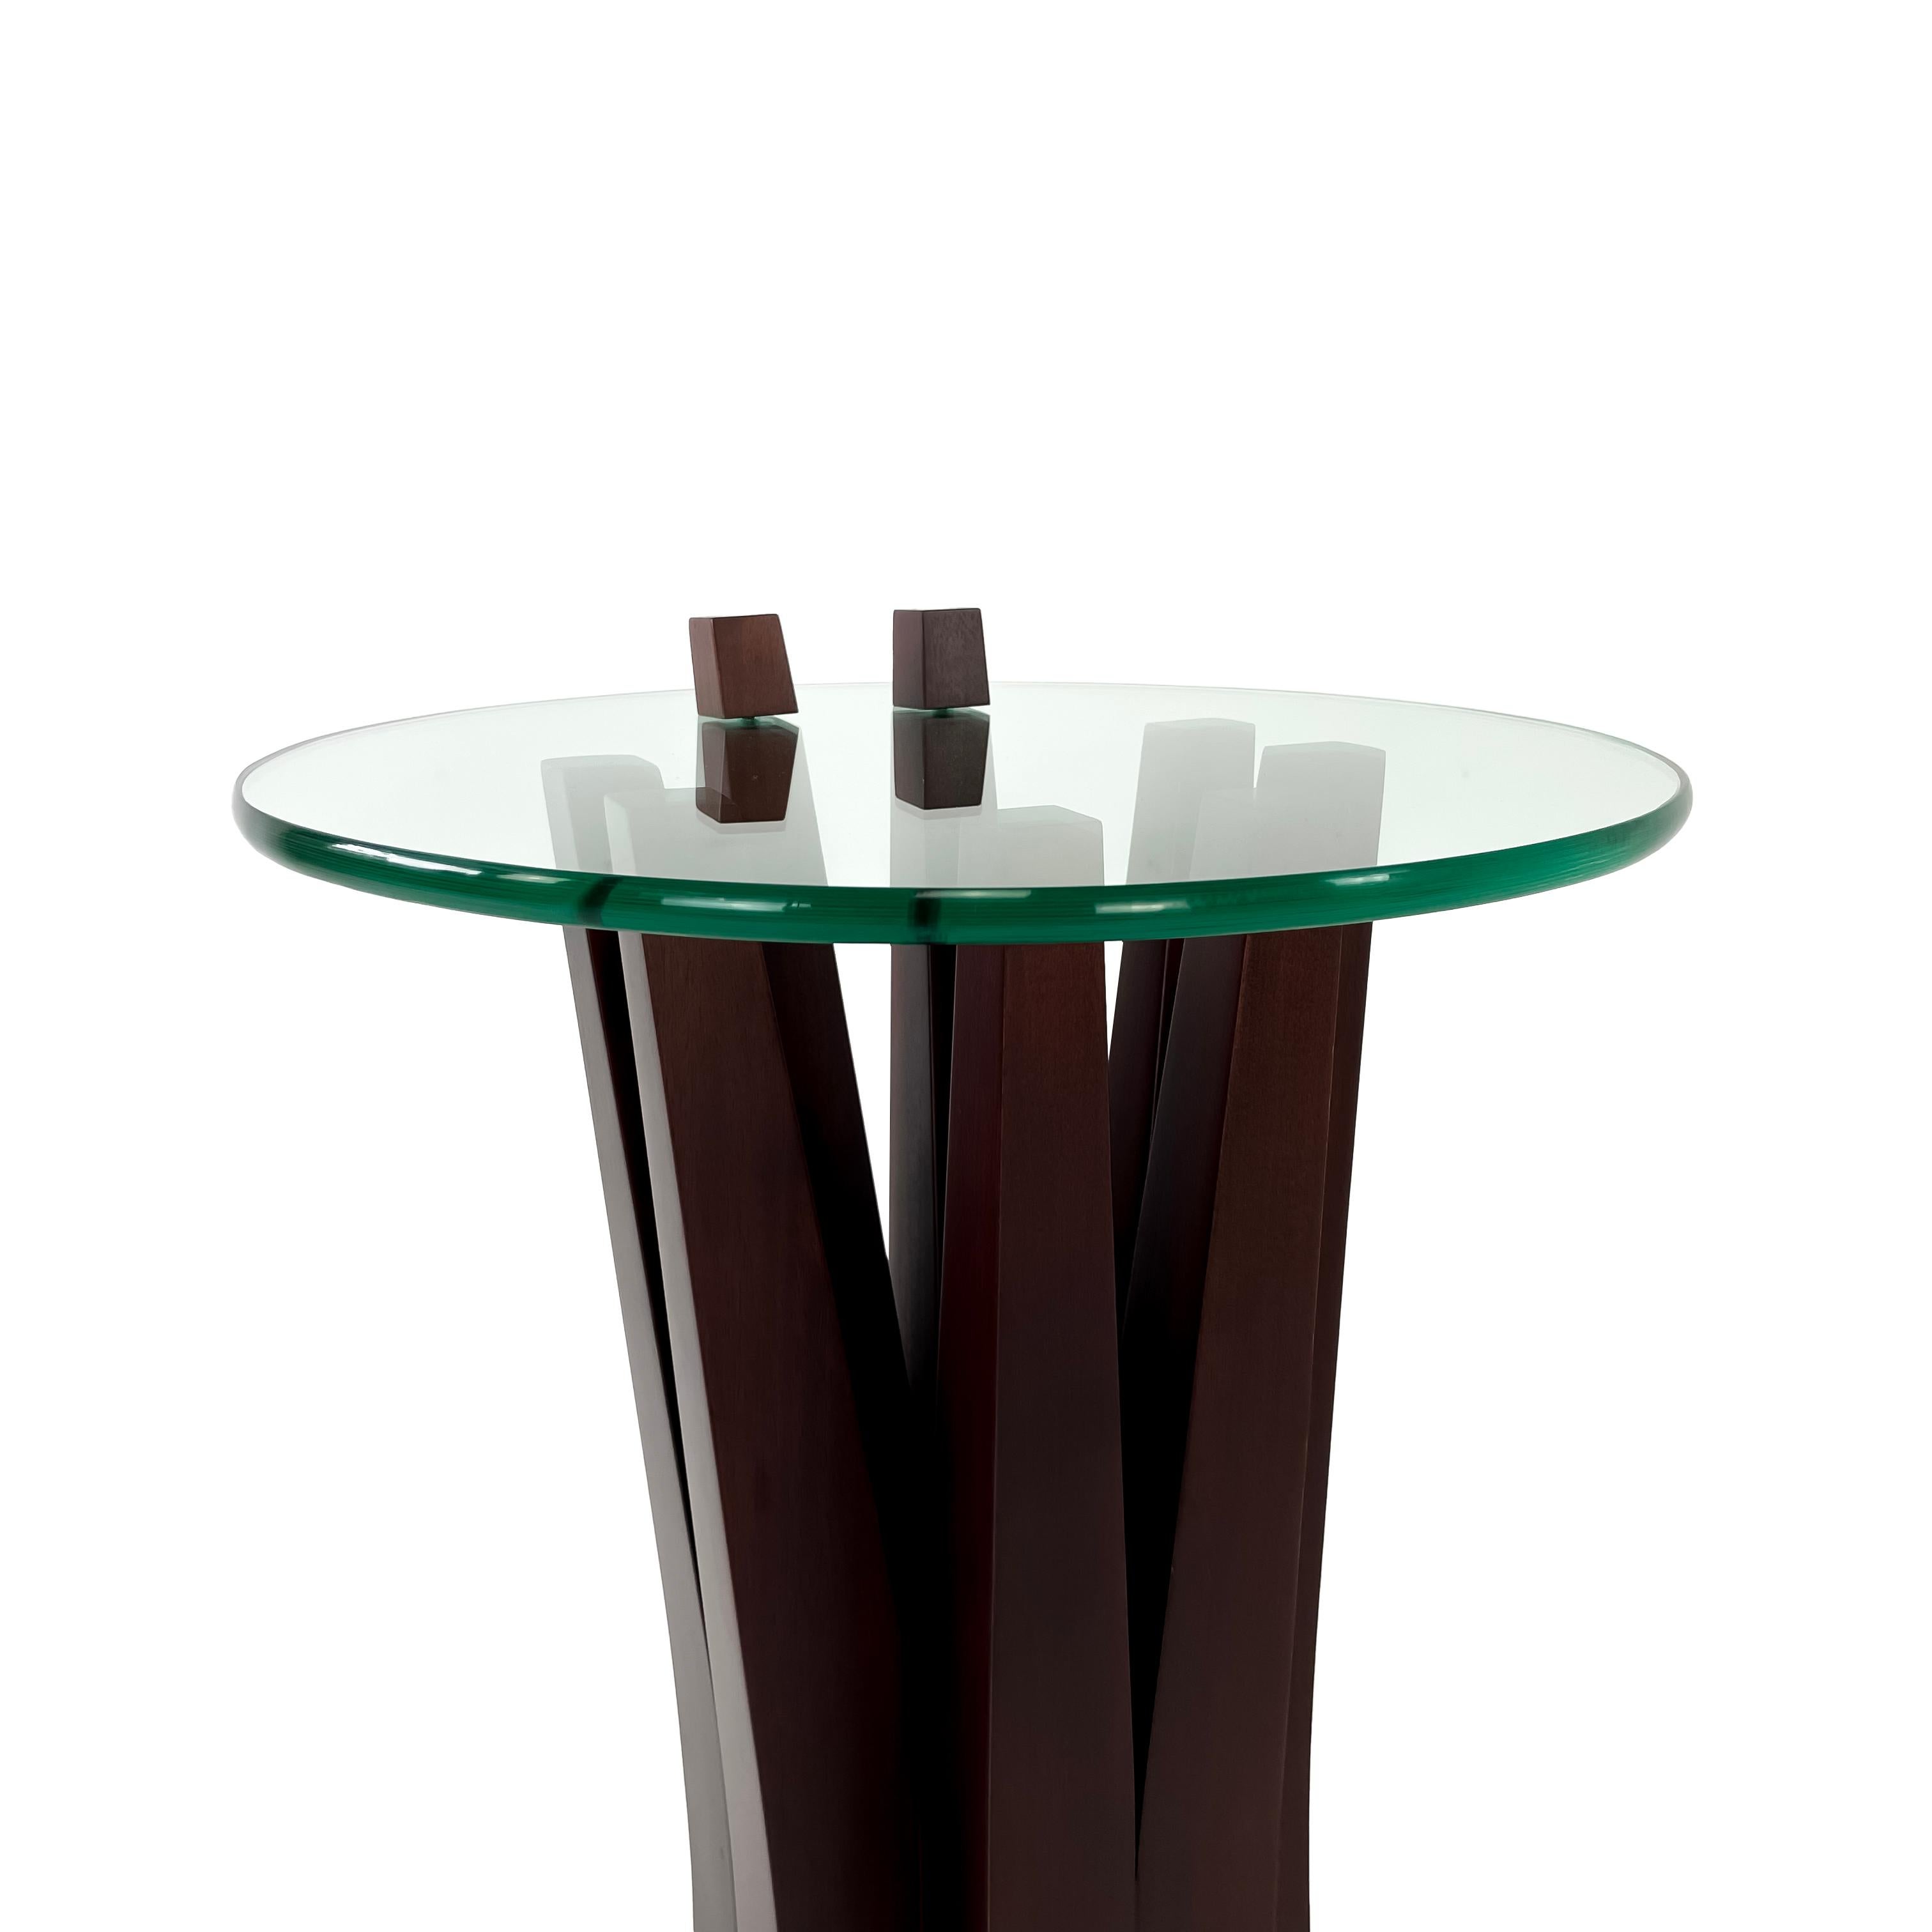 Guatemalan Modern Solid Wood and Glass Pedestal Table by Pierre Sarkis For Sale